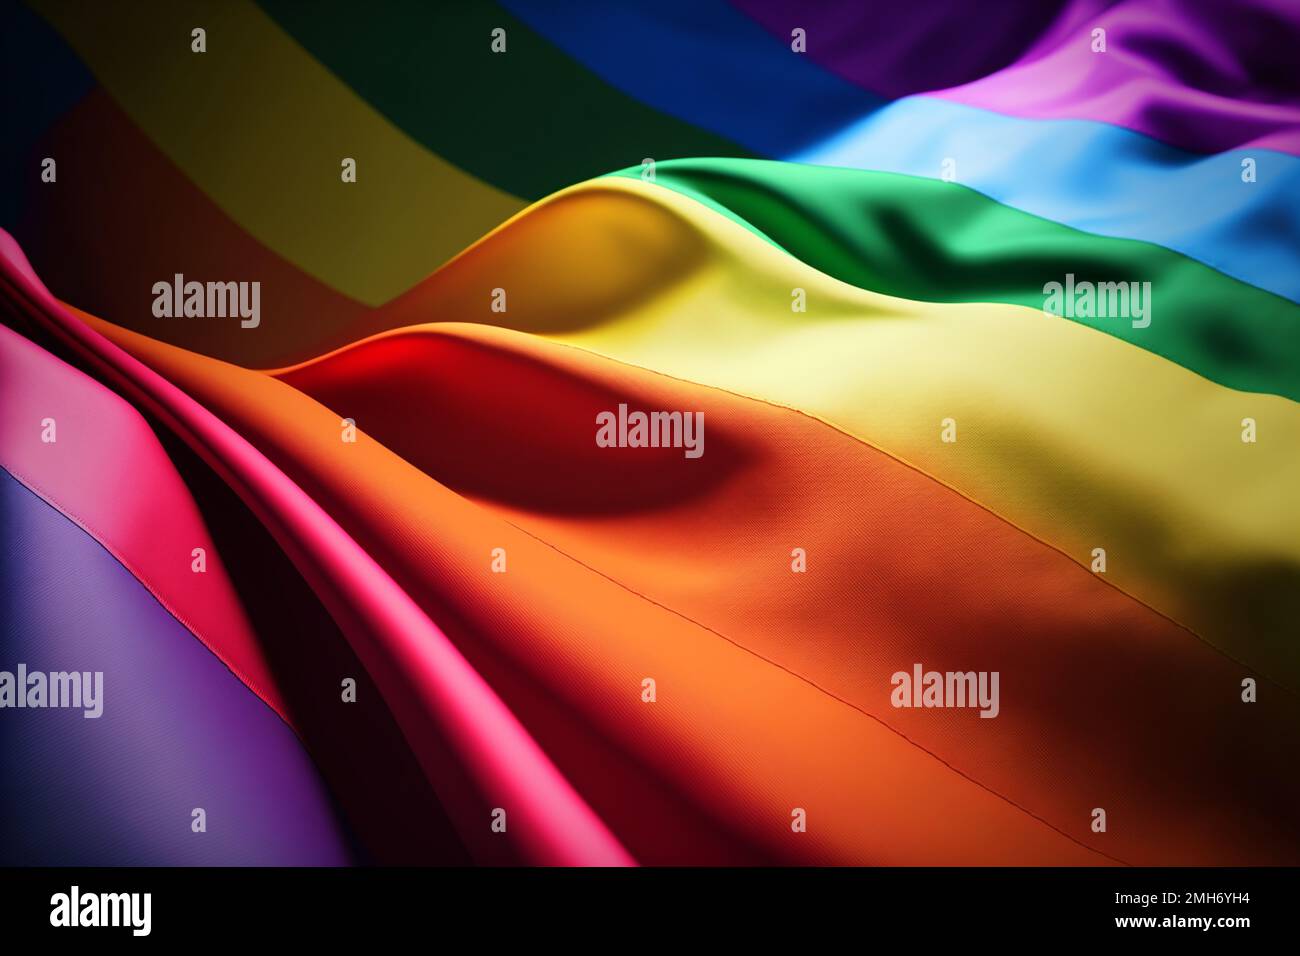 A colorful rainbow flag, with creased and folded fabric adding depth and movement. The flag represents the LGBTQ community and stands for diversity, acceptance, and equality Stock Photo